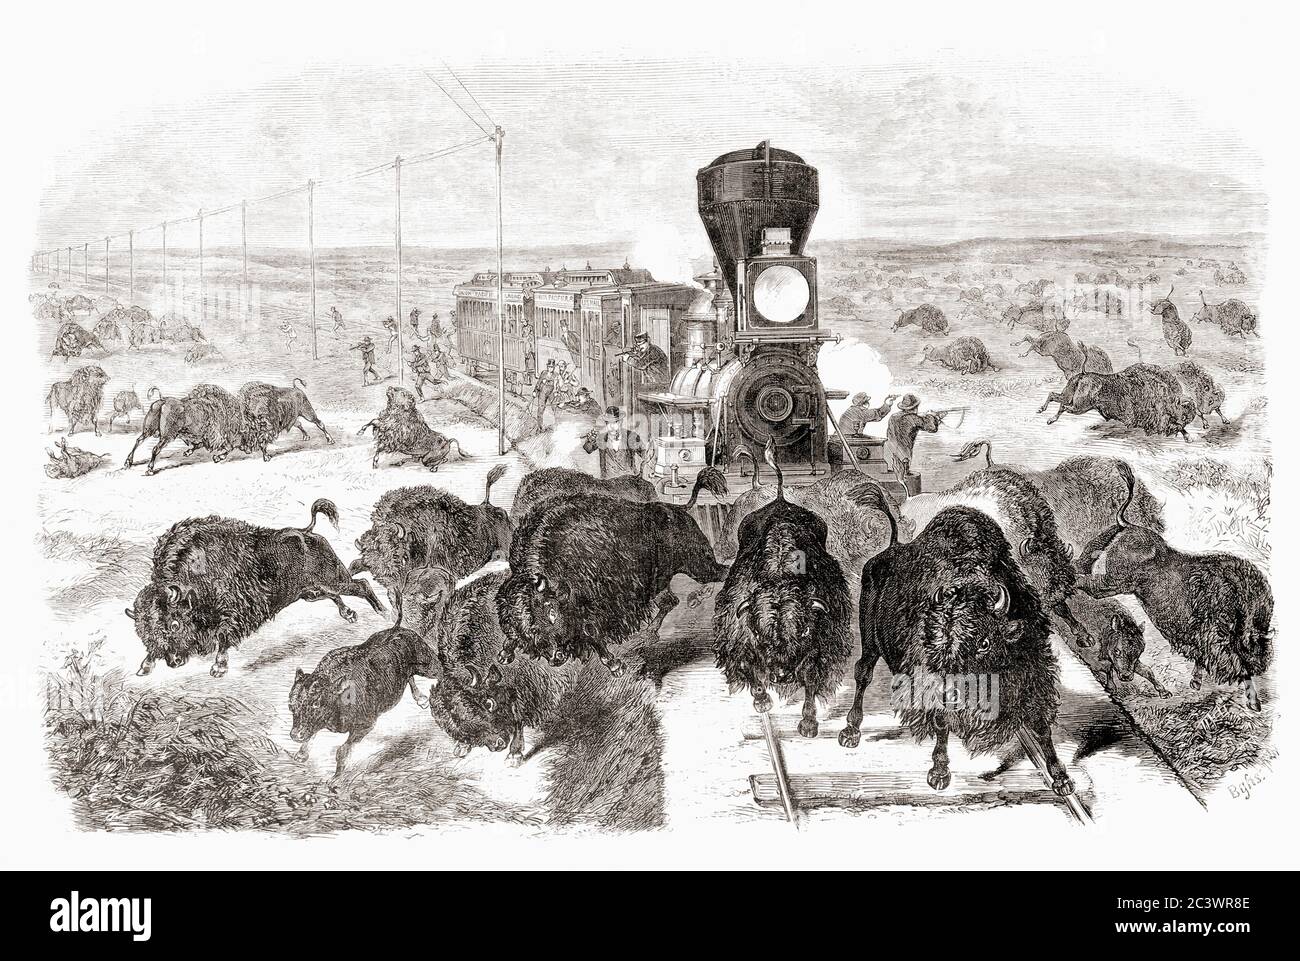 Shooting buffalo on the Kansas-Pacific Railroad line.  After a work by an unidentified artist which appeared in the June 3, 1871 edition of Frank Leslie's illustrated newspaper.  The mass slaughter of buffalo in the USA reduced the wild herds from tens of millions to near extinction. This picture reflects the advertising of railroad companies that a passenger could “hunt by rail.” Stock Photo